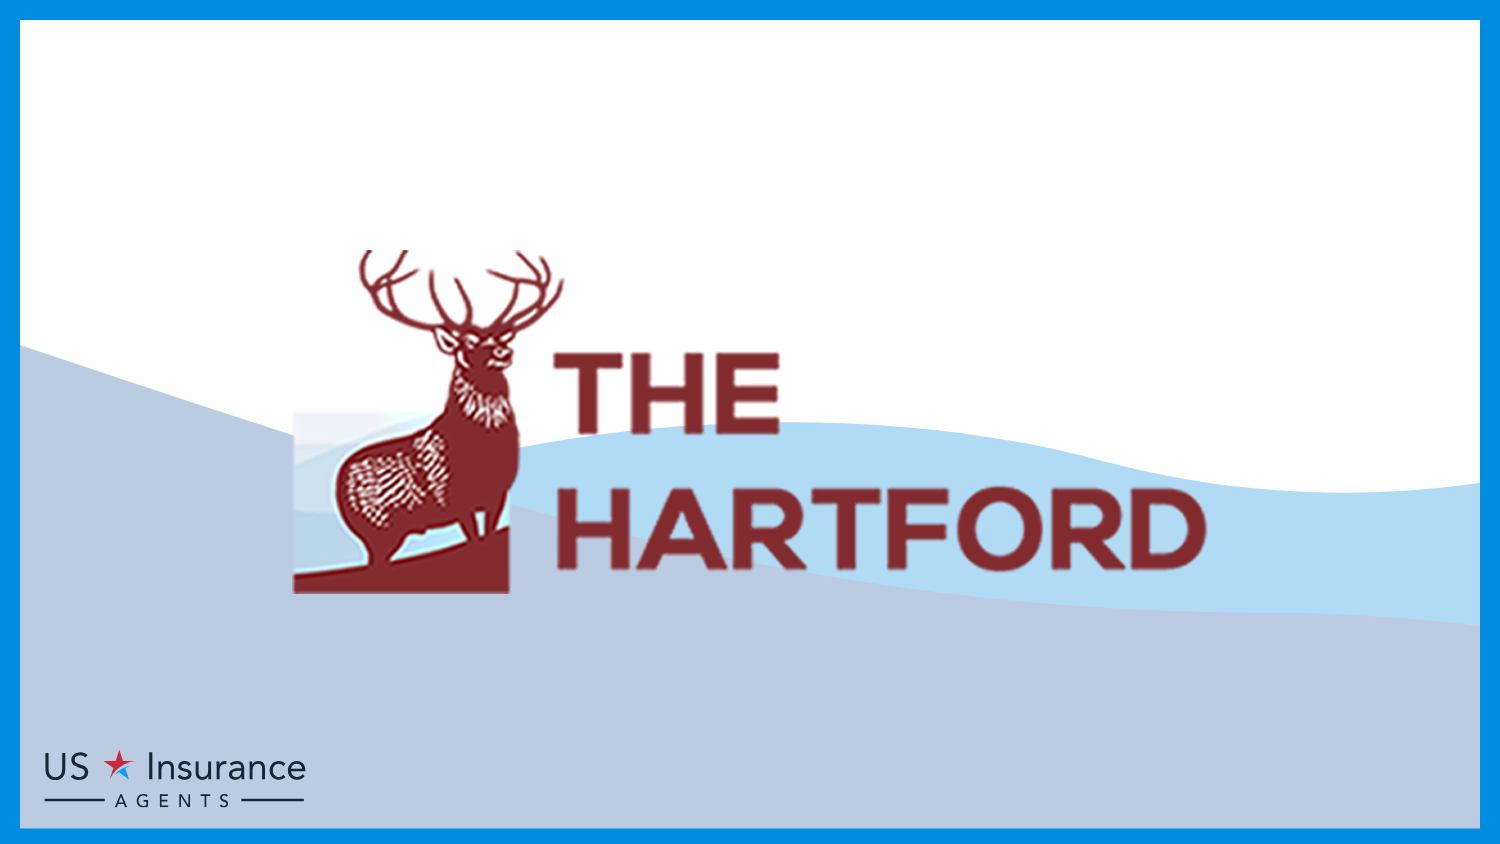 The Hartford: Best Business Insurance for eCommerce Businesses